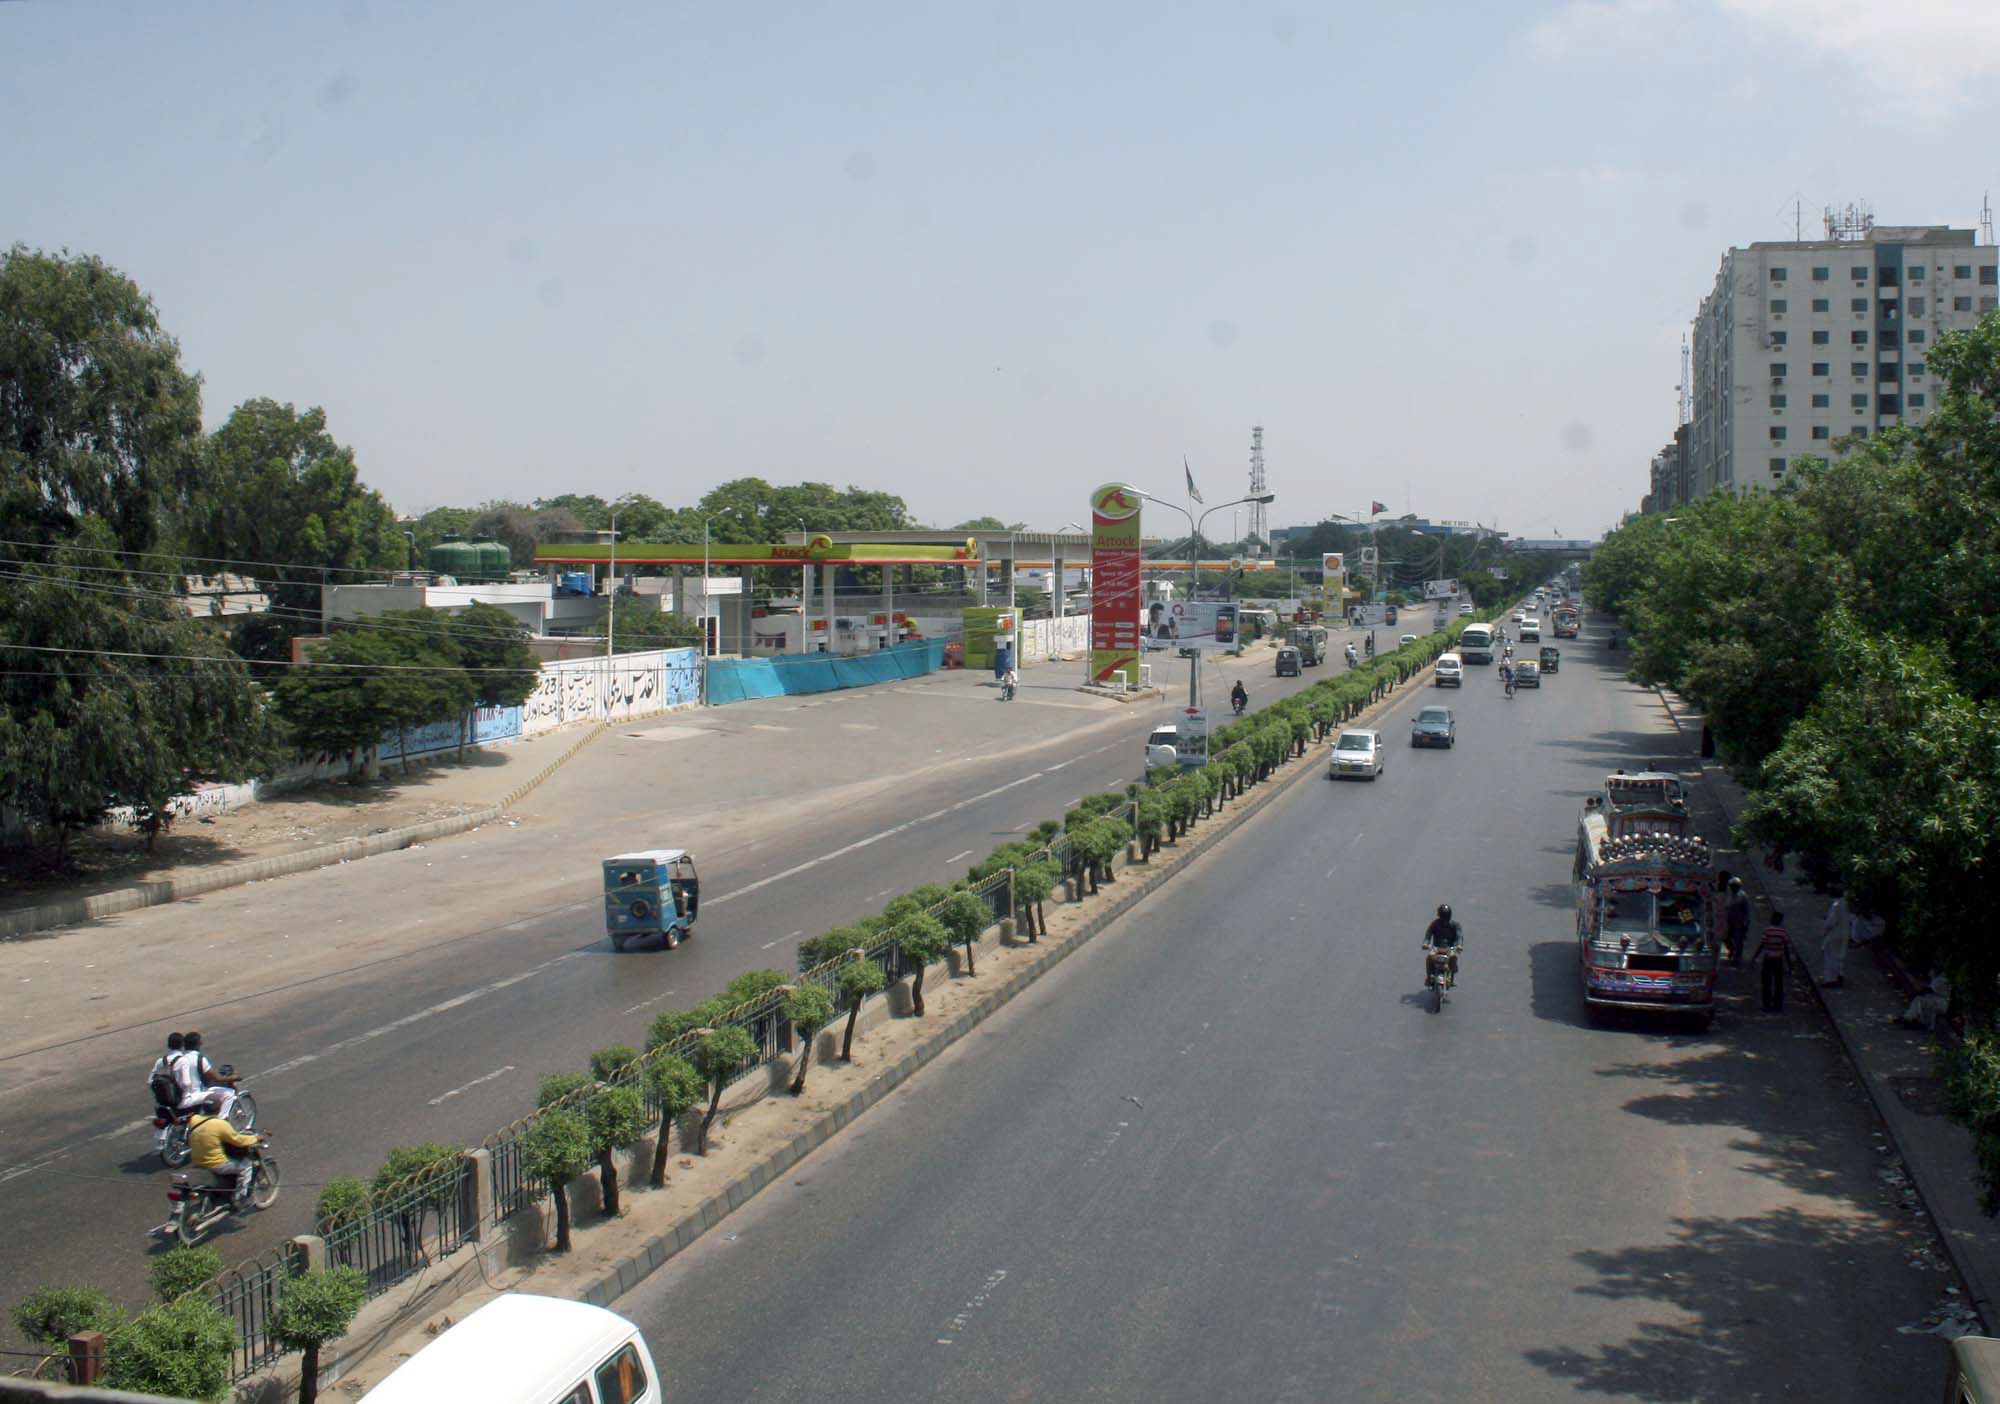 shahrah e faisal seen deserted after unannounced protests following the arrest of former mqm mpa sindh assembly nadeem hashmi photo ppi